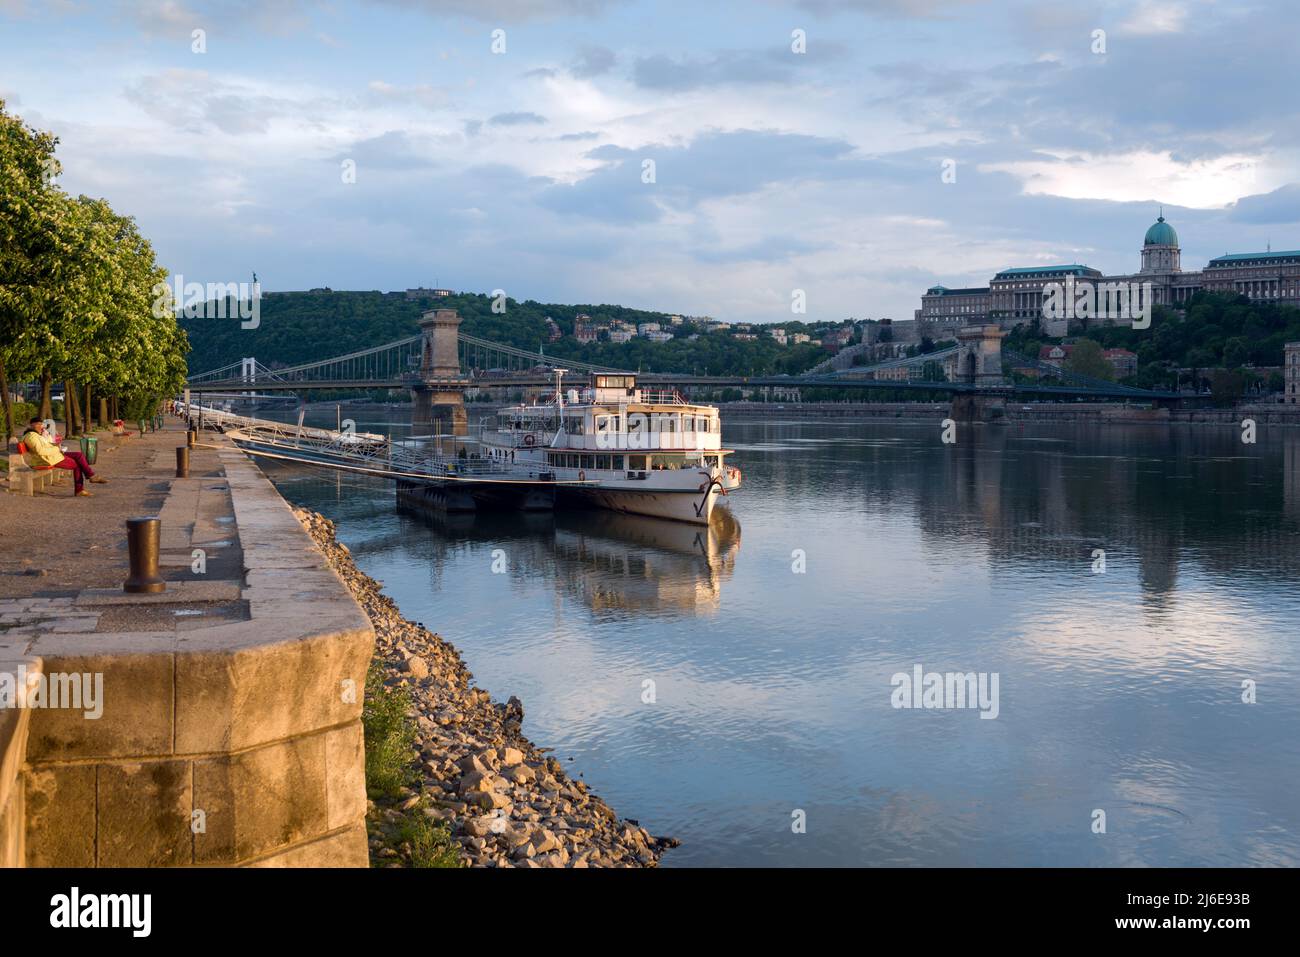 Budapest riverfront featuring a boat Stock Photo